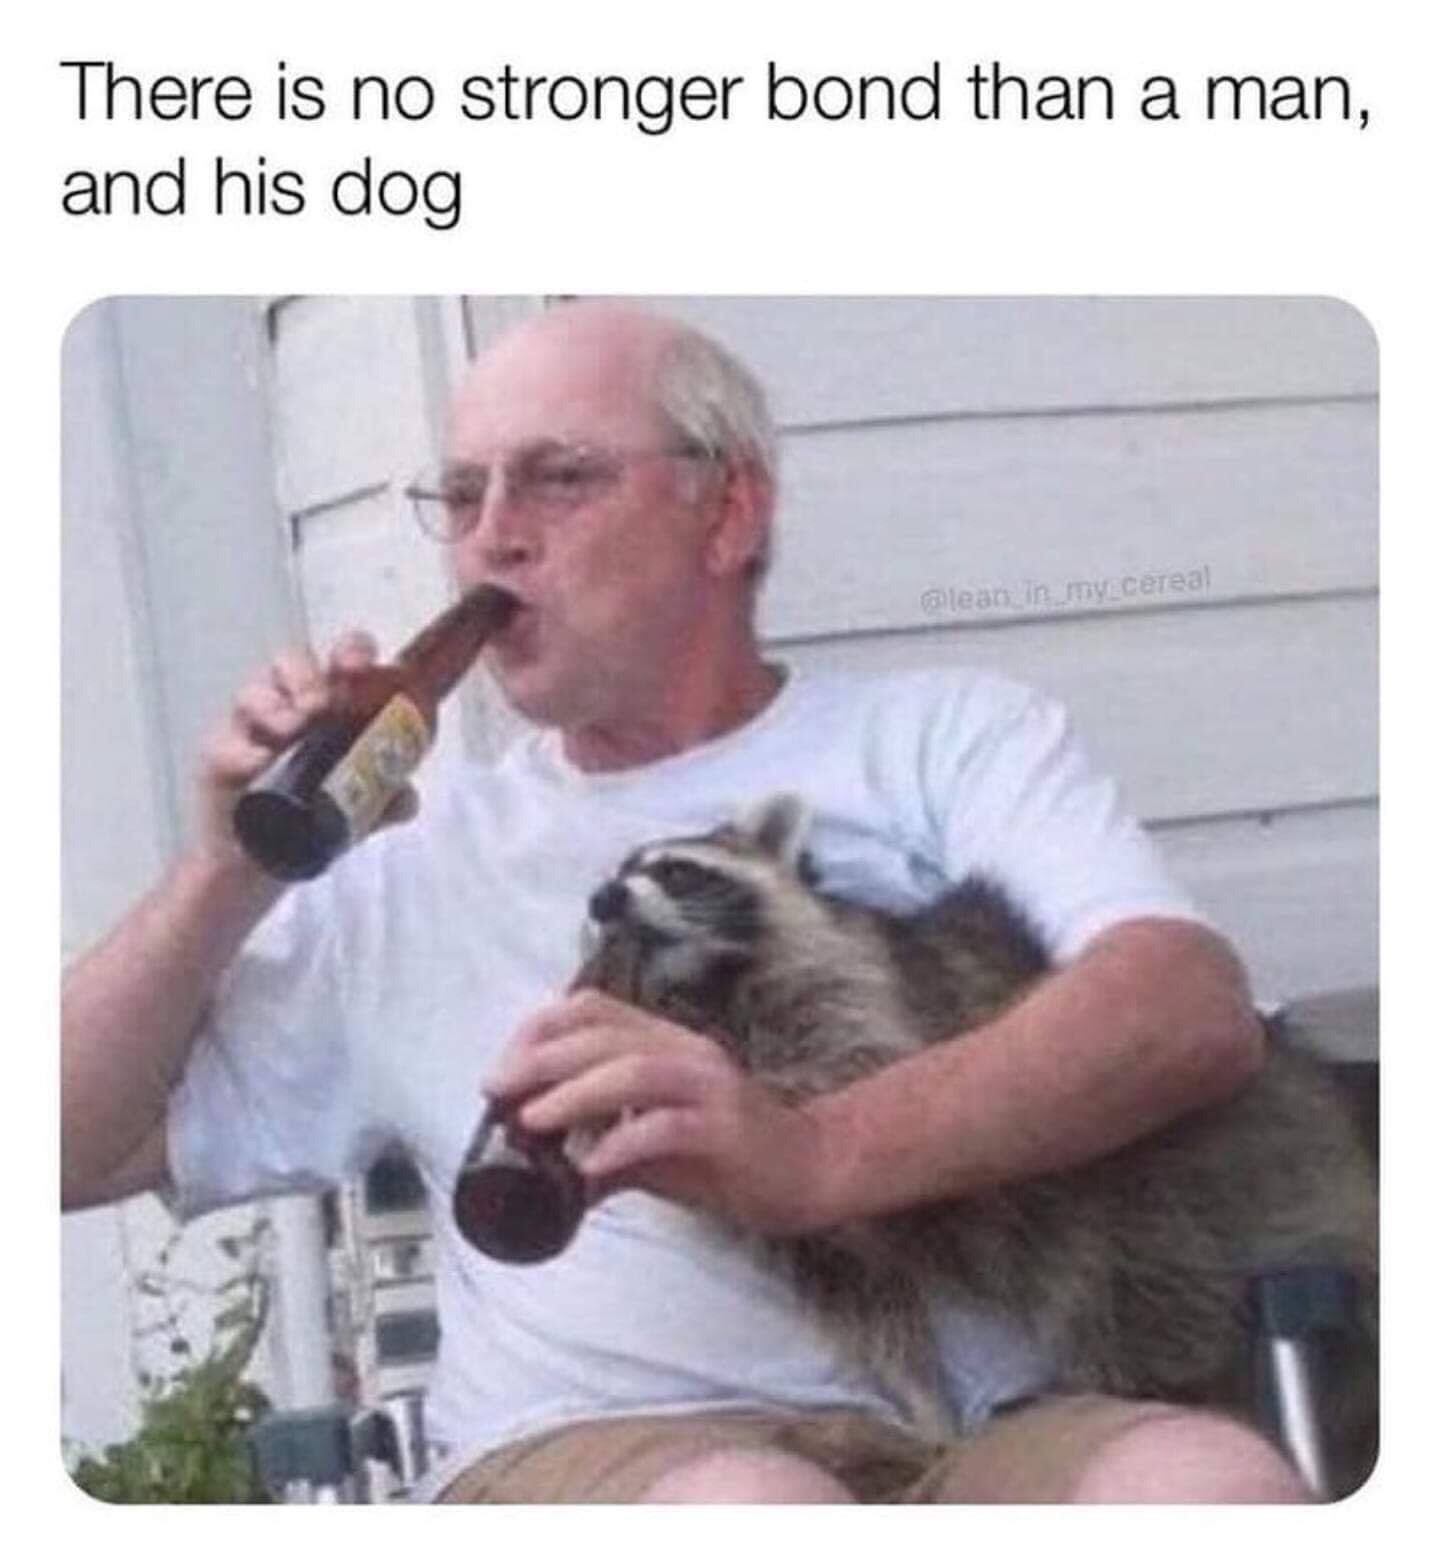 man and his dog meme - There is no stronger bond than a man, and his dog lemy cereal